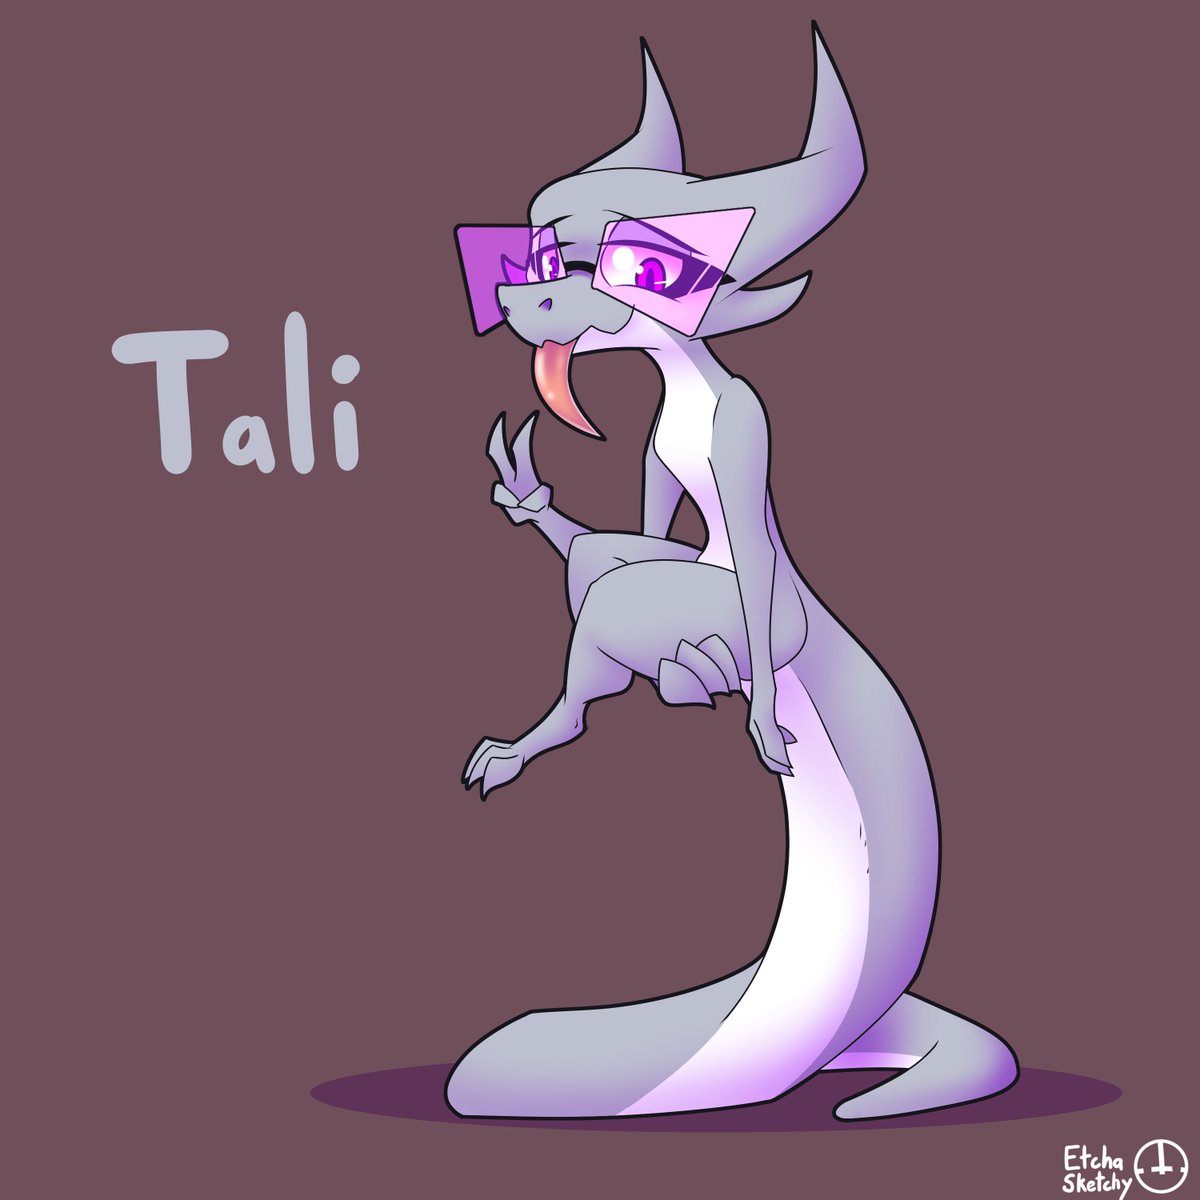 New kobold time! Meet Tali! She has a lot of tail